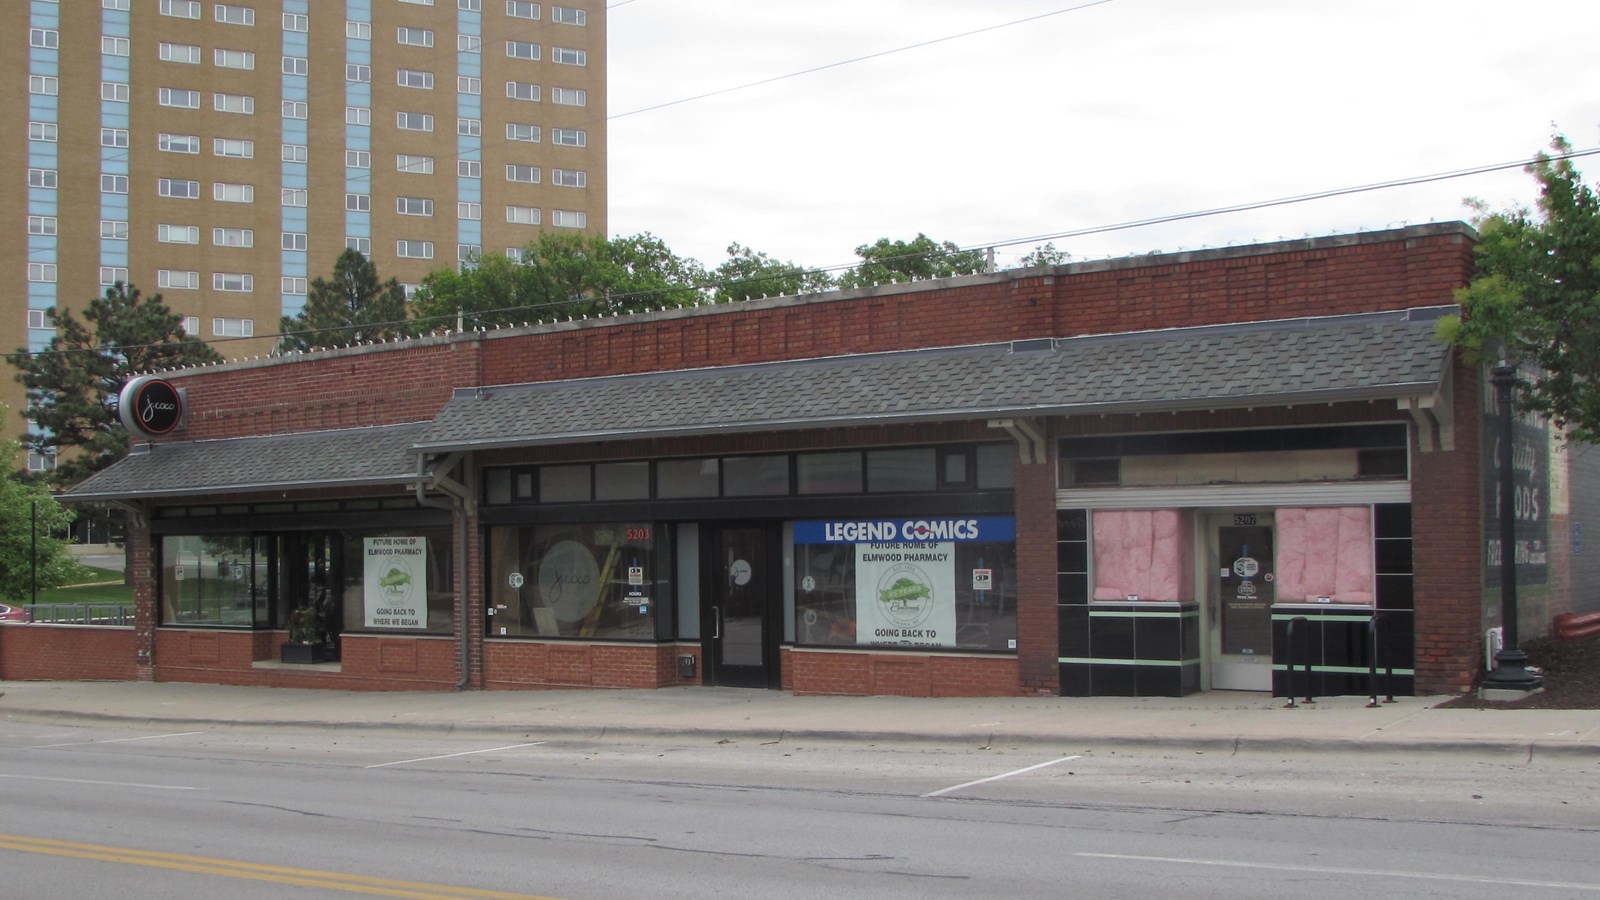 Three bay commercial building. One-story, brick, with shingled awning across front.